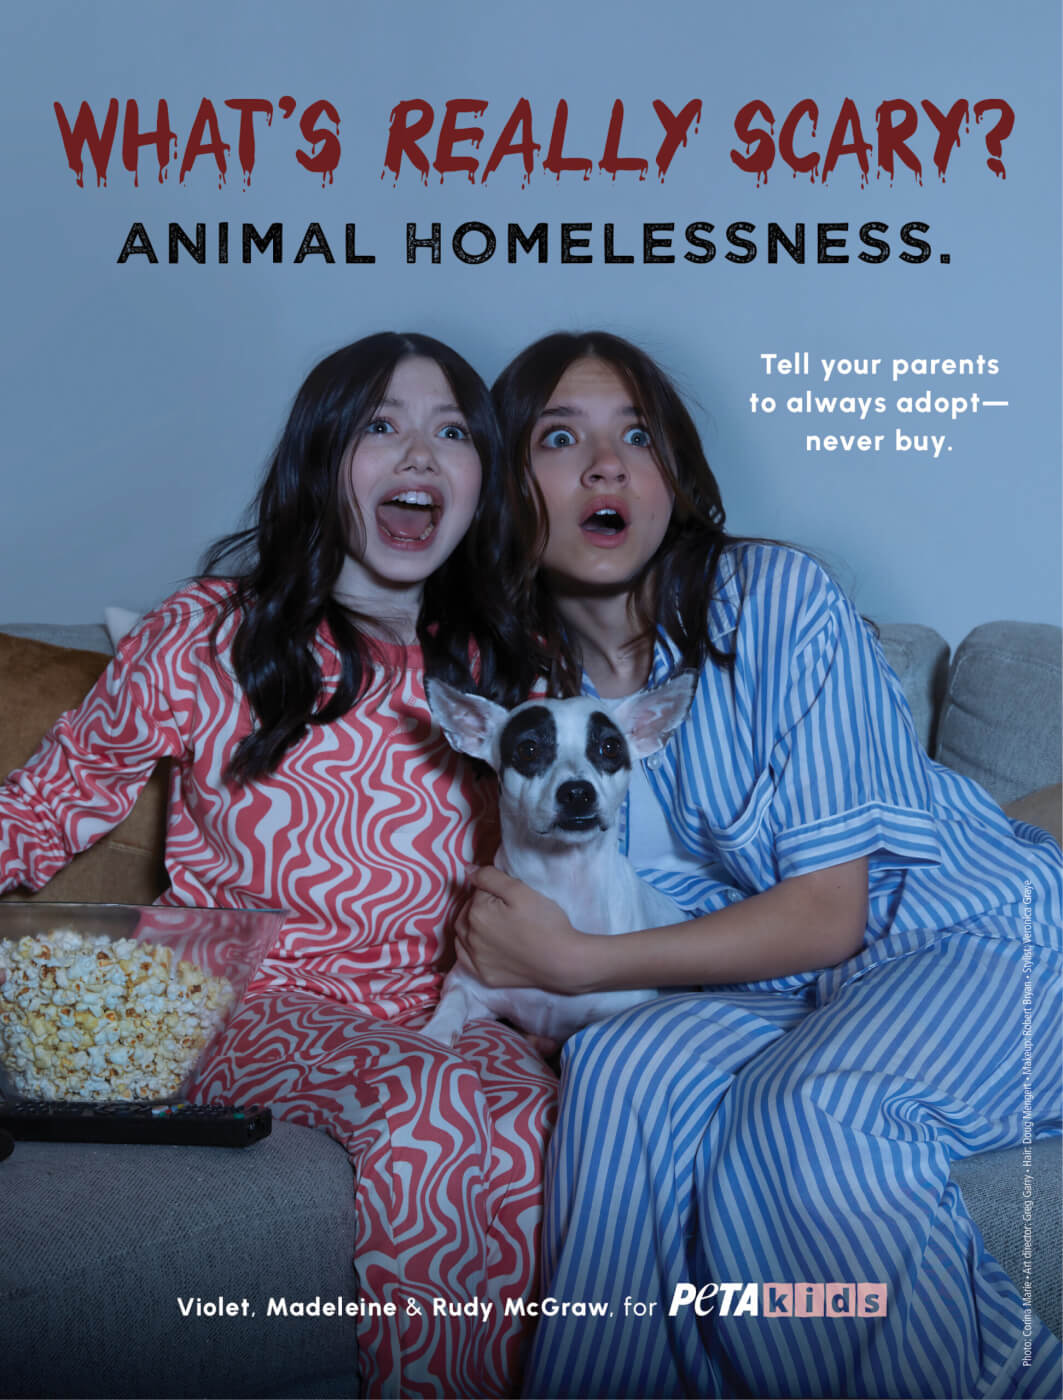 Violet and Madeleine McGraw in a PETA Kids ad advocating for adoption